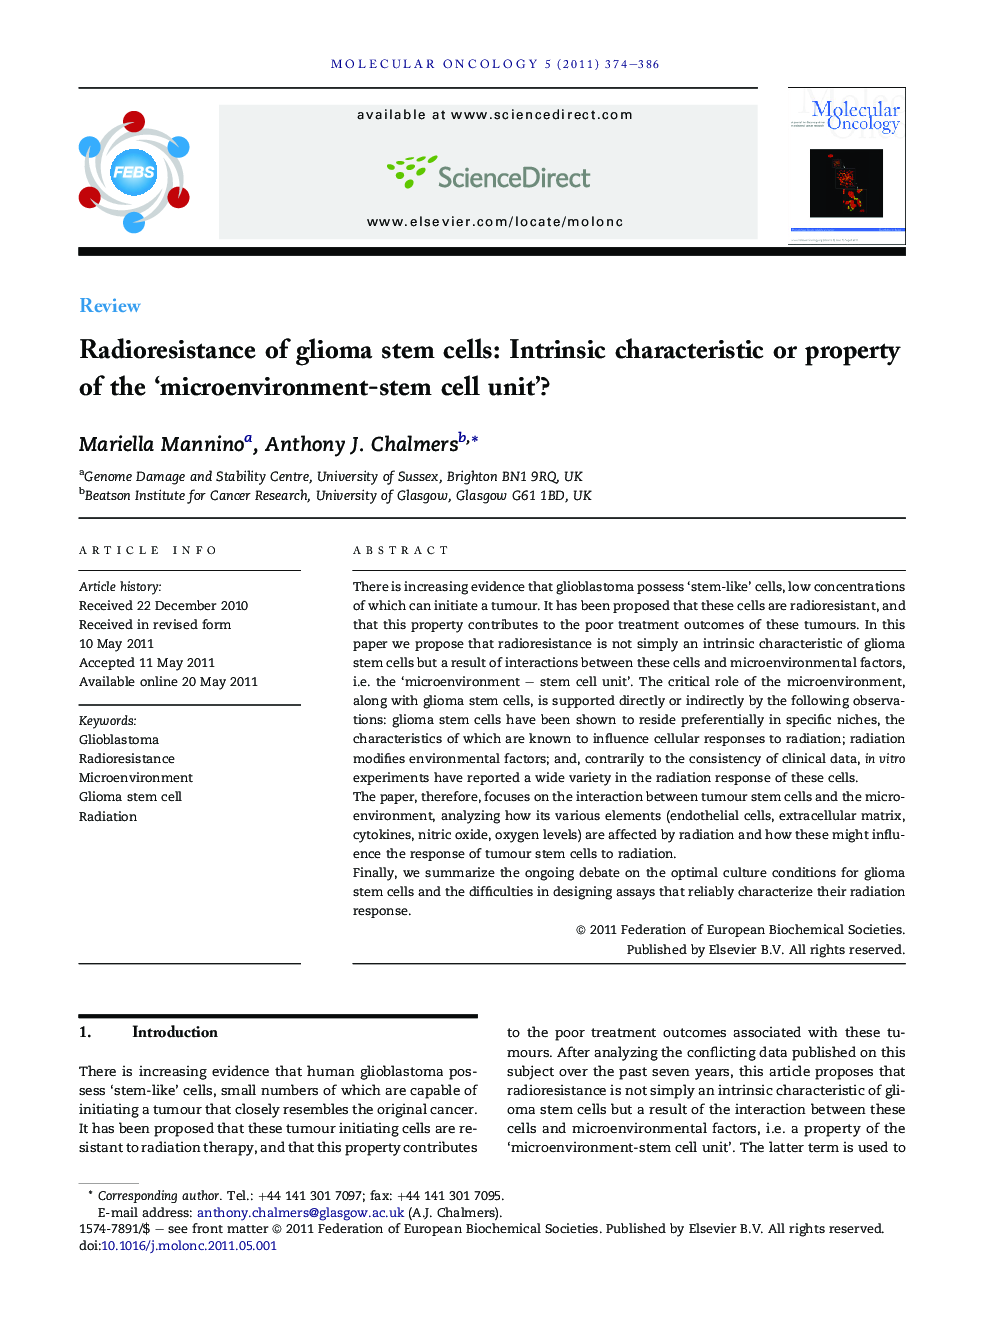 Radioresistance of glioma stem cells: Intrinsic characteristic or property of the 'microenvironment-stem cell unit'?